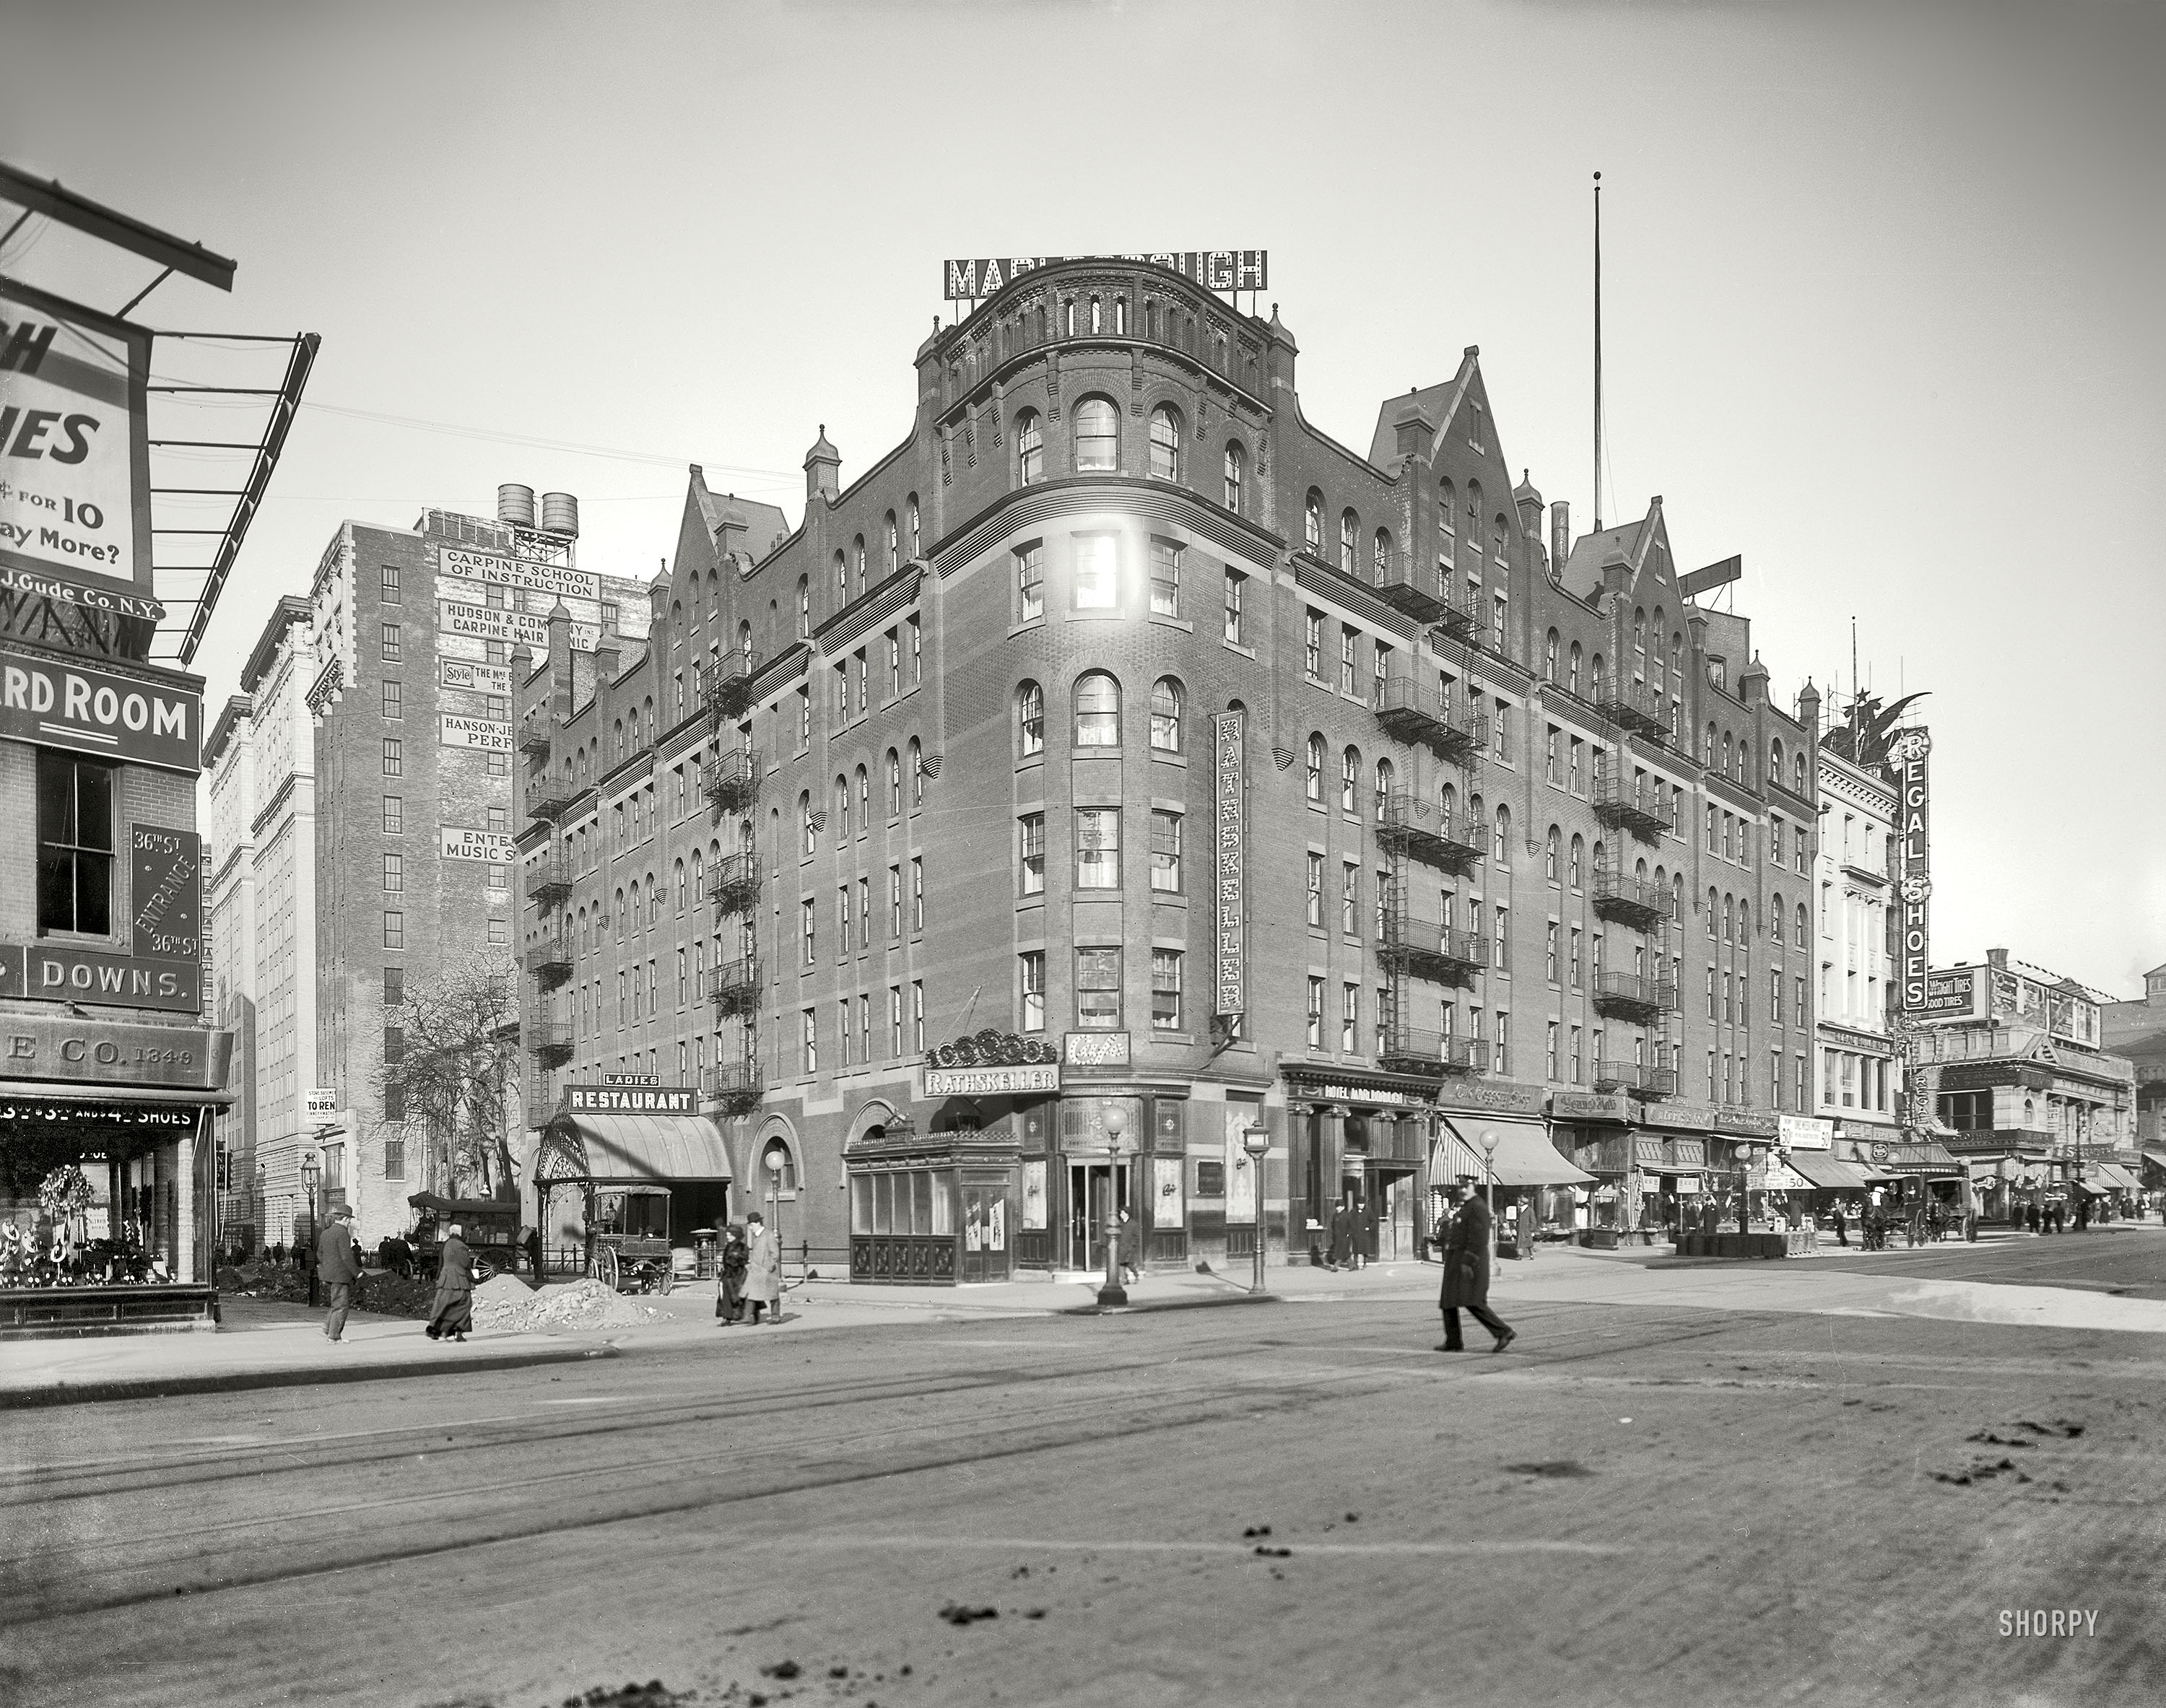 New York circa 1908. "Hotel Marlborough." On Herald Square at Broadway and West 36th. Among the amenities: A "Ladies' Restaurant." View full size.